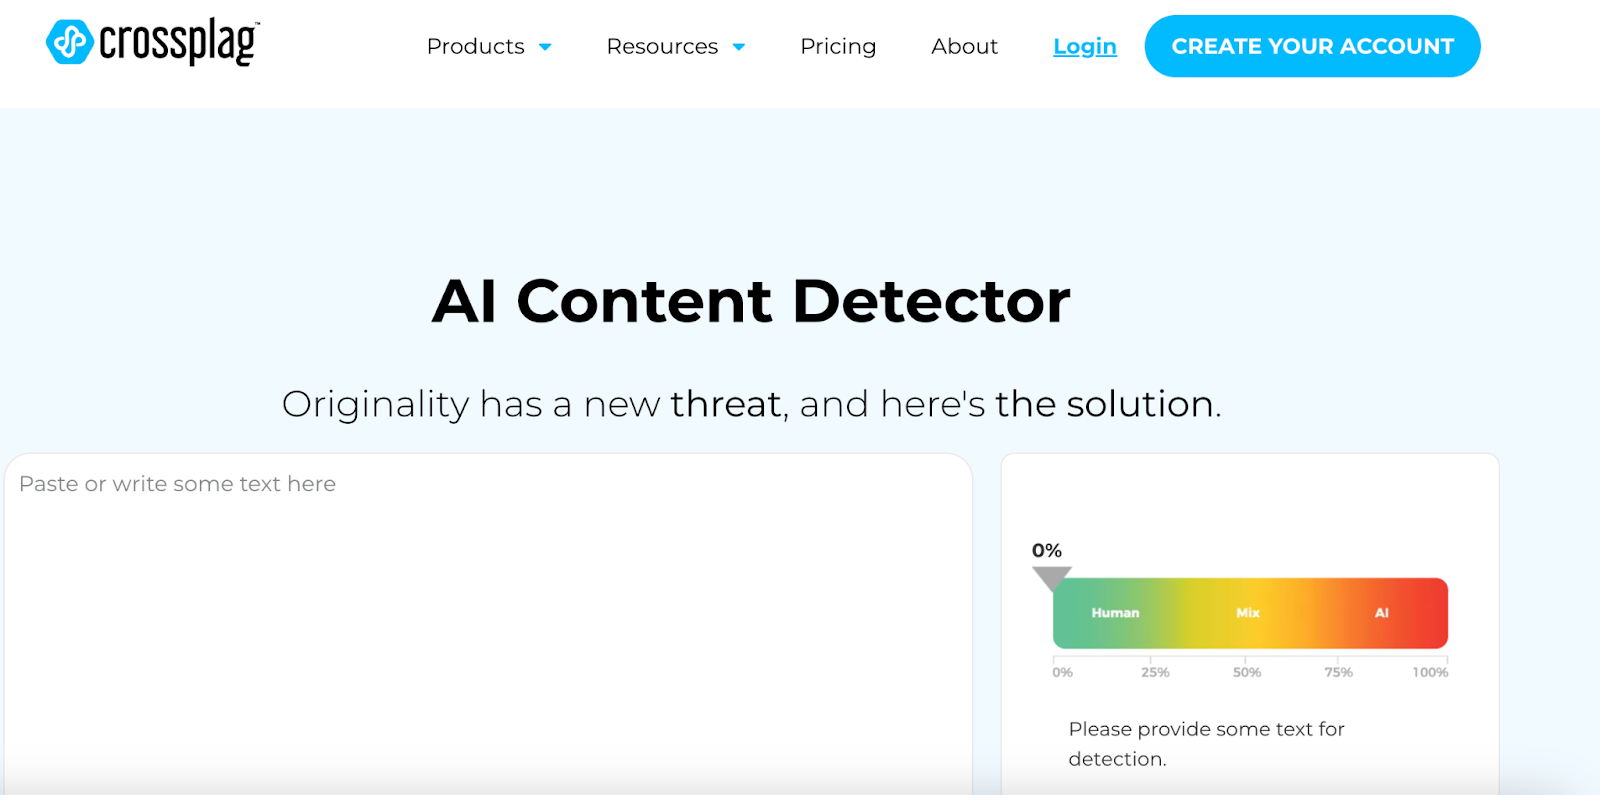 Crossplg's AI Detector